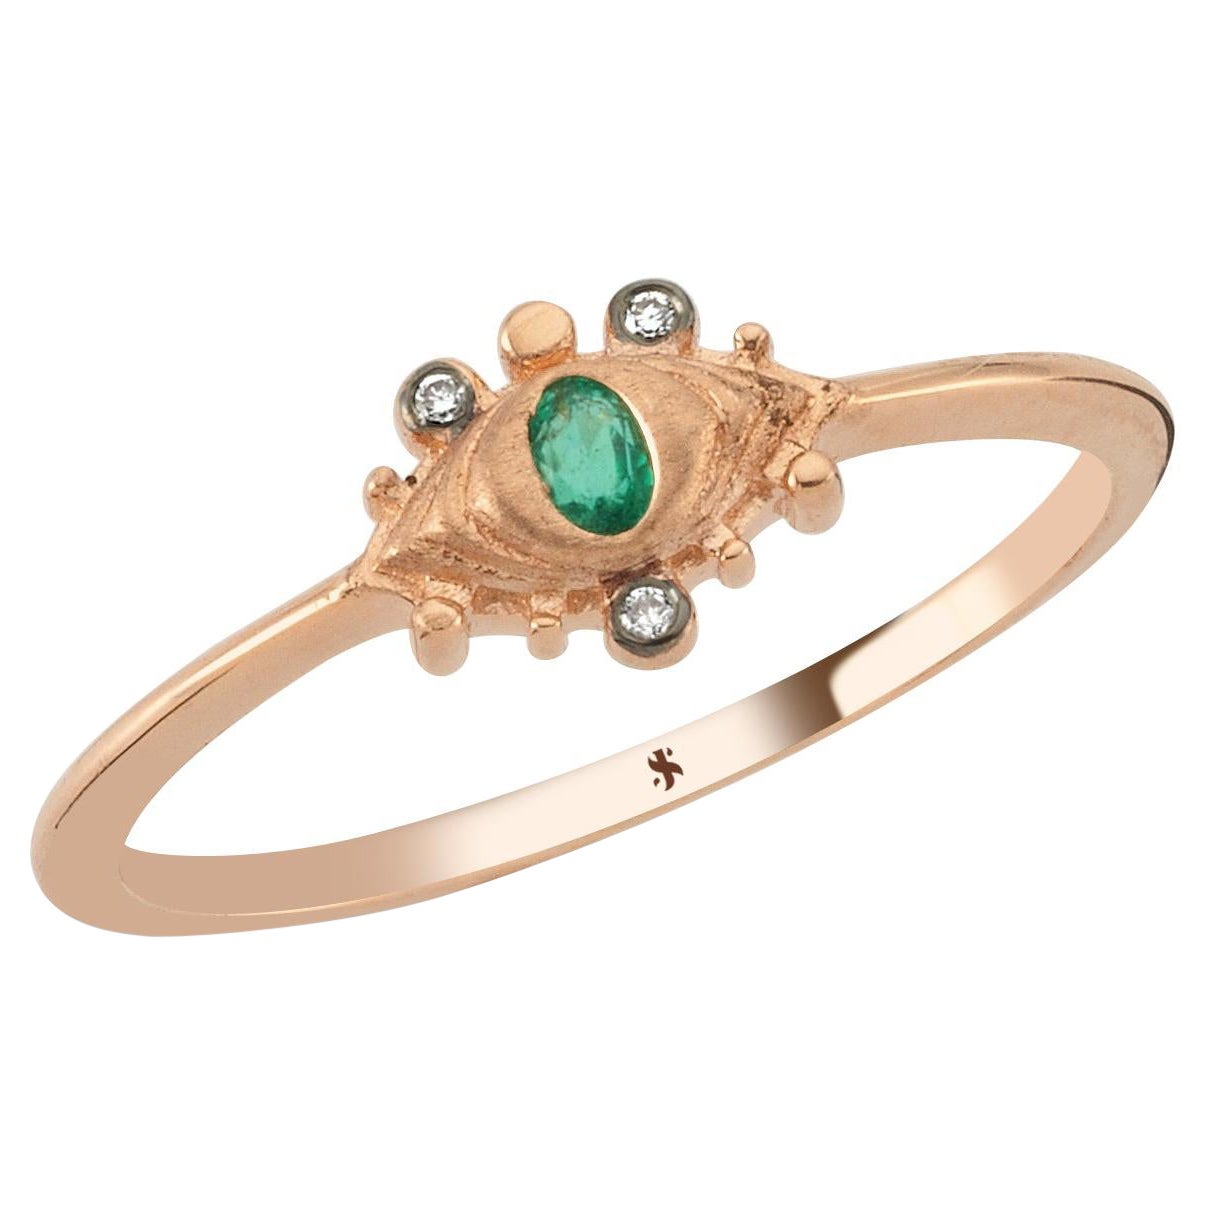 Dragon Eye Emerald Ring in 14K Rose Gold with Emerald and White Diamond by Selda